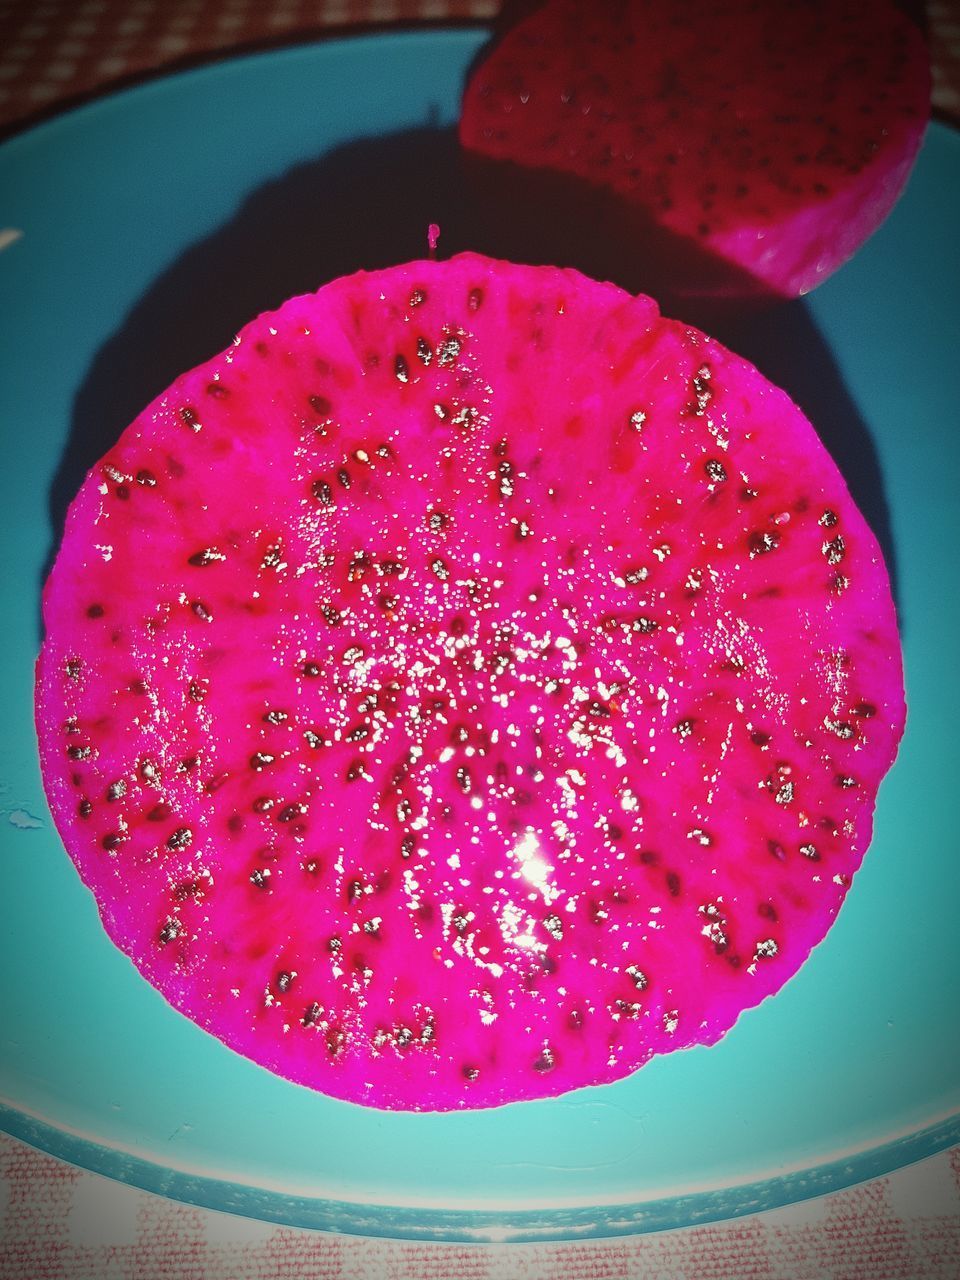 HIGH ANGLE VIEW OF PINK FRUITS IN BOWL